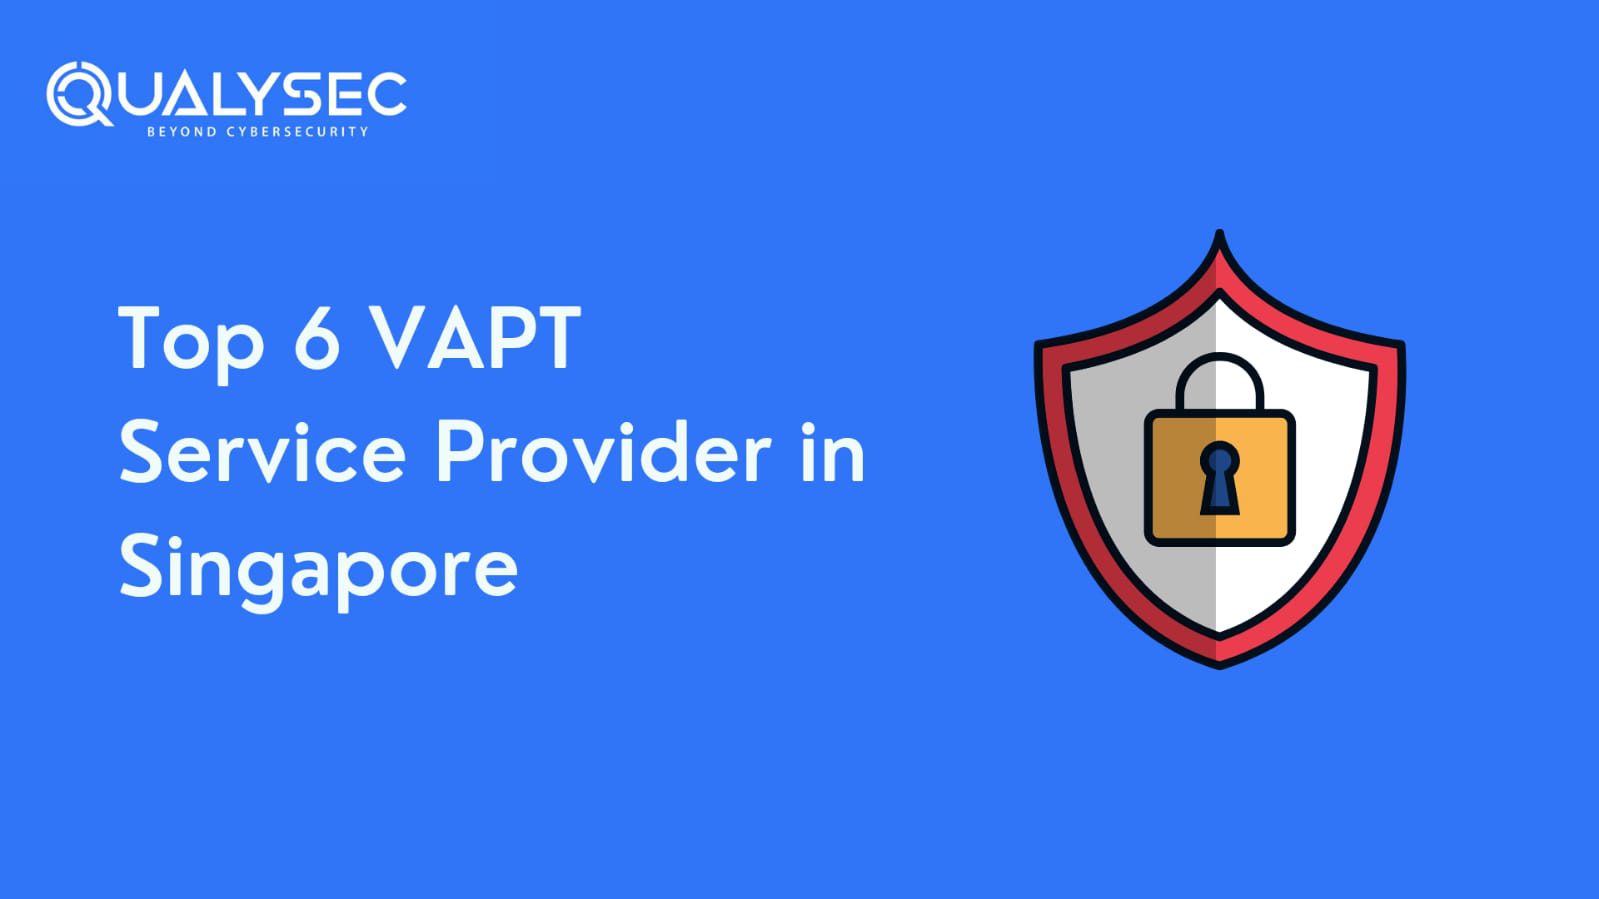 Top 6 VAPT Service Providers in Singapore